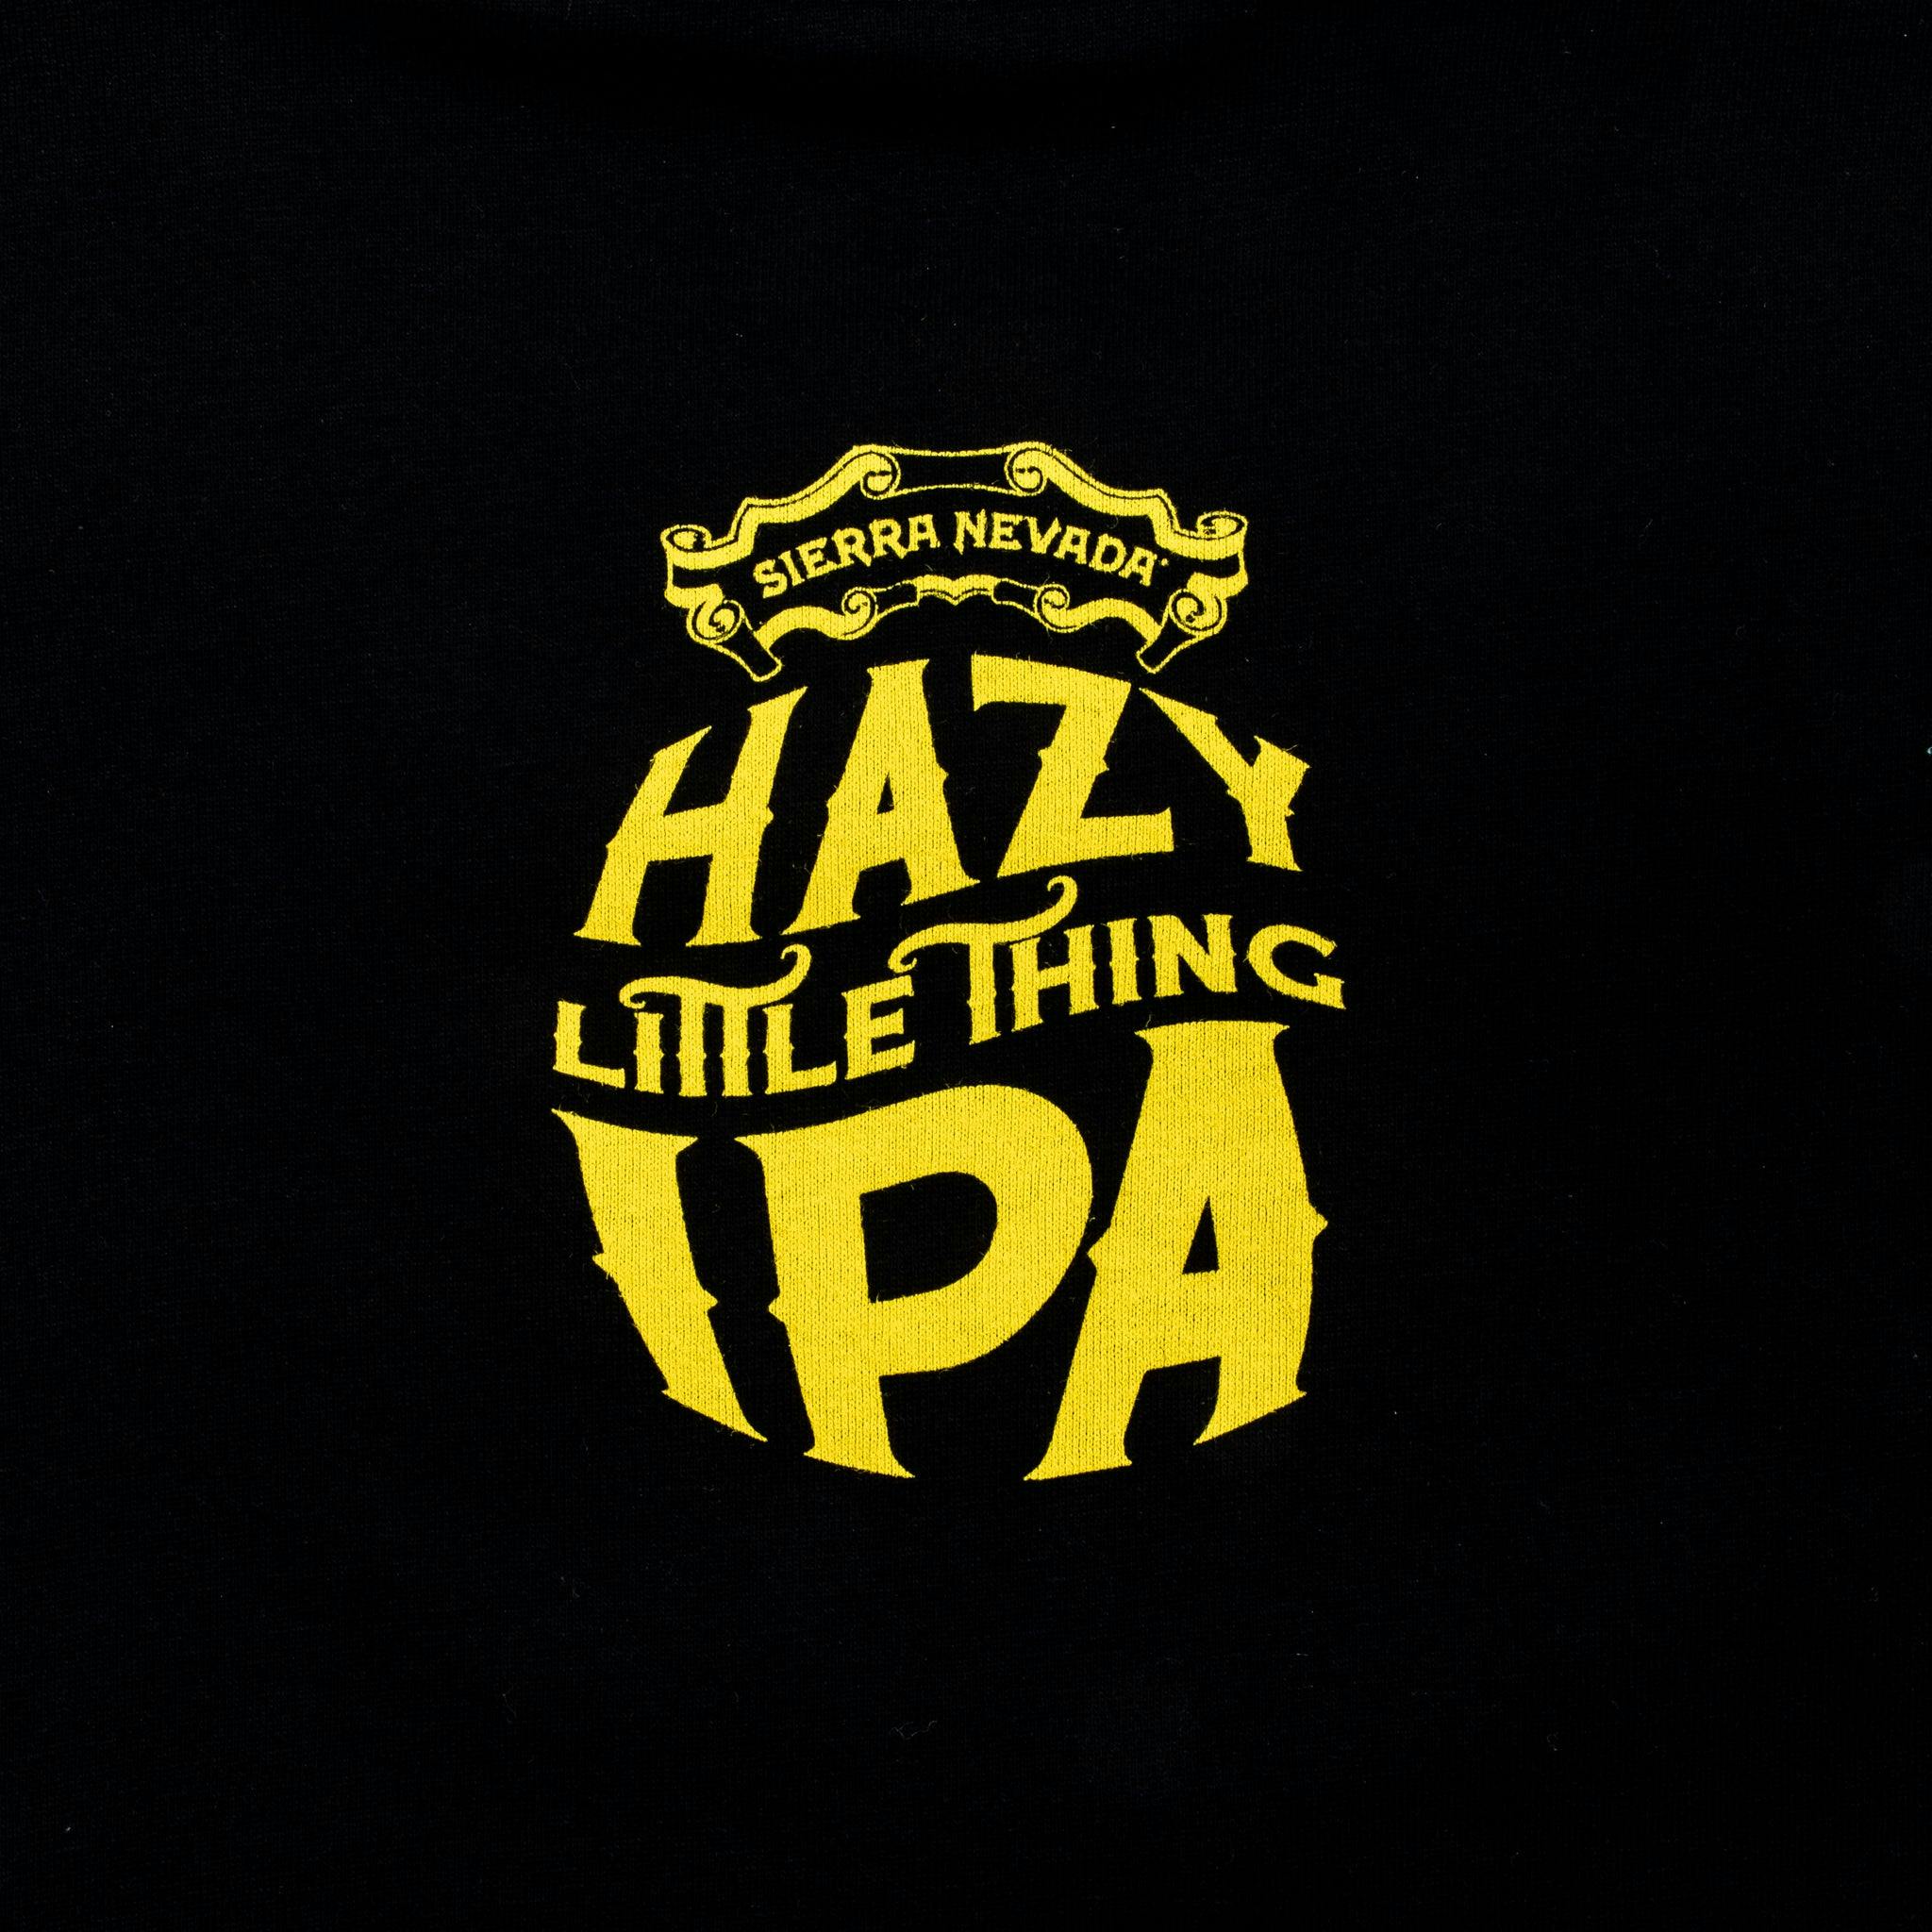 Hazy Little Thing Pocket T-Shirt detail of Hazy Little Thing graphic